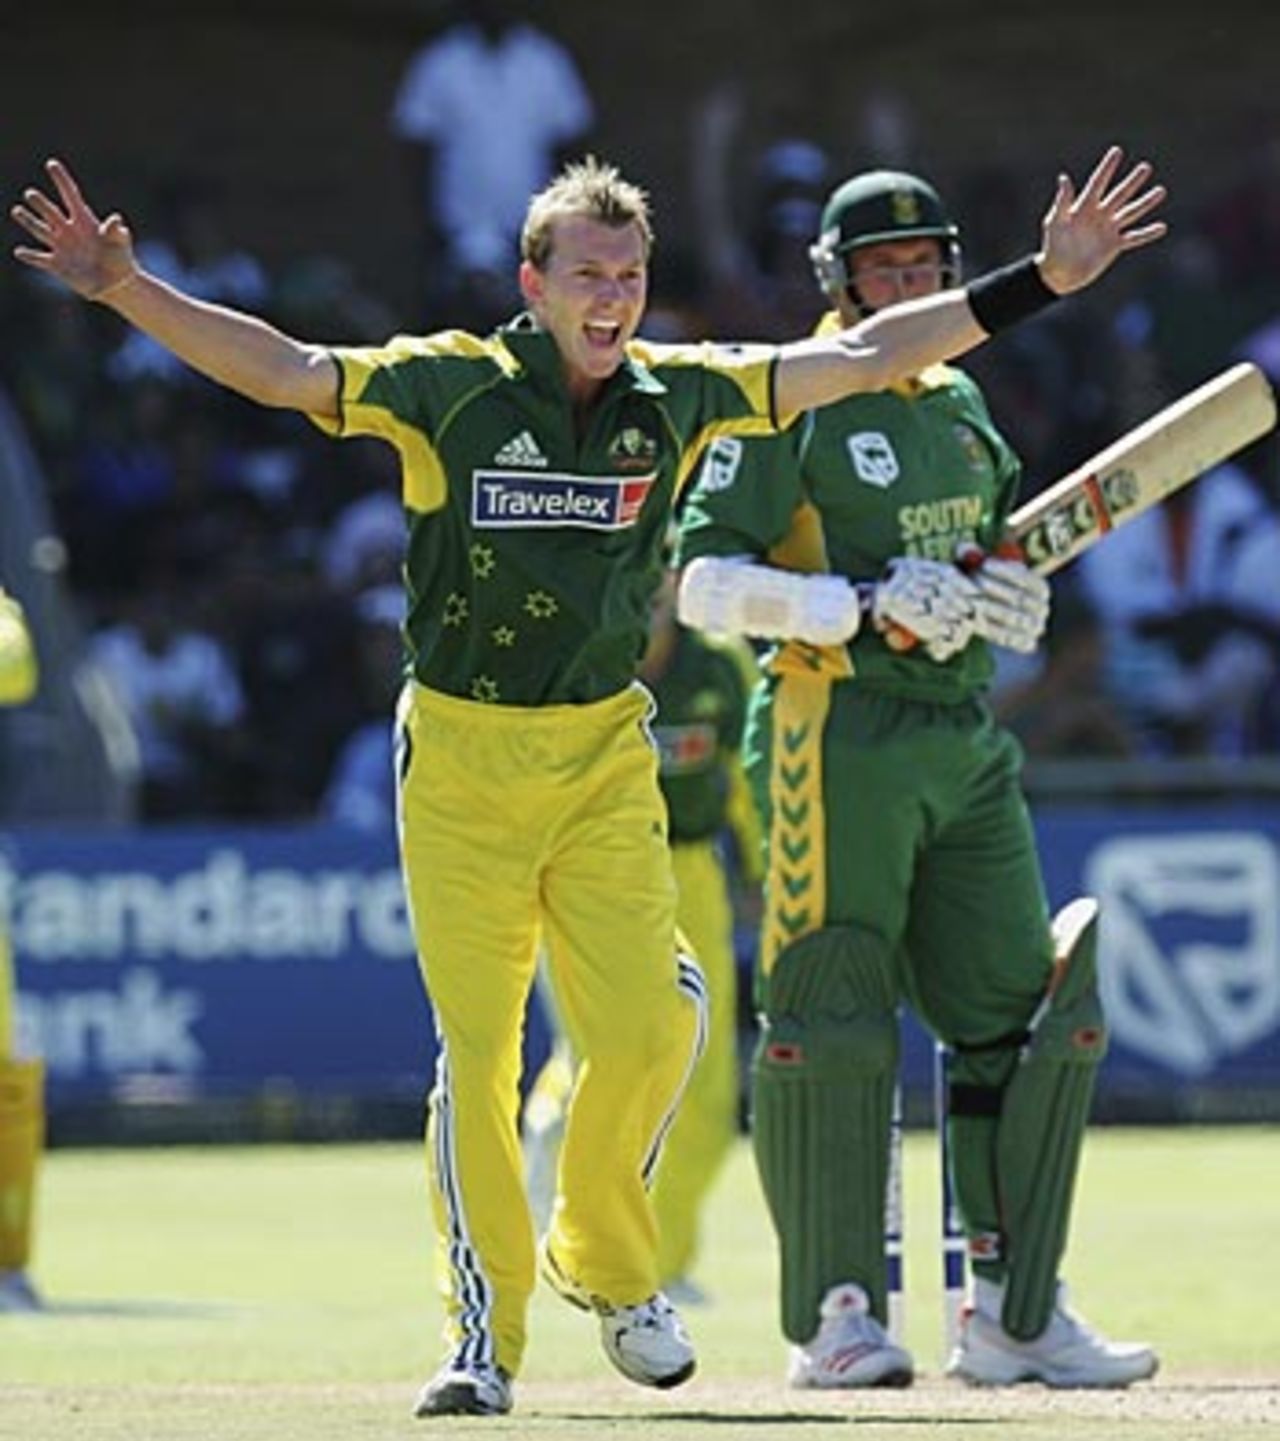 Brett Lee appeals and Graeme Smith is out caught behind, South Africa v Australia, 3rd ODI, Port Elizabeth, March 5, 2006